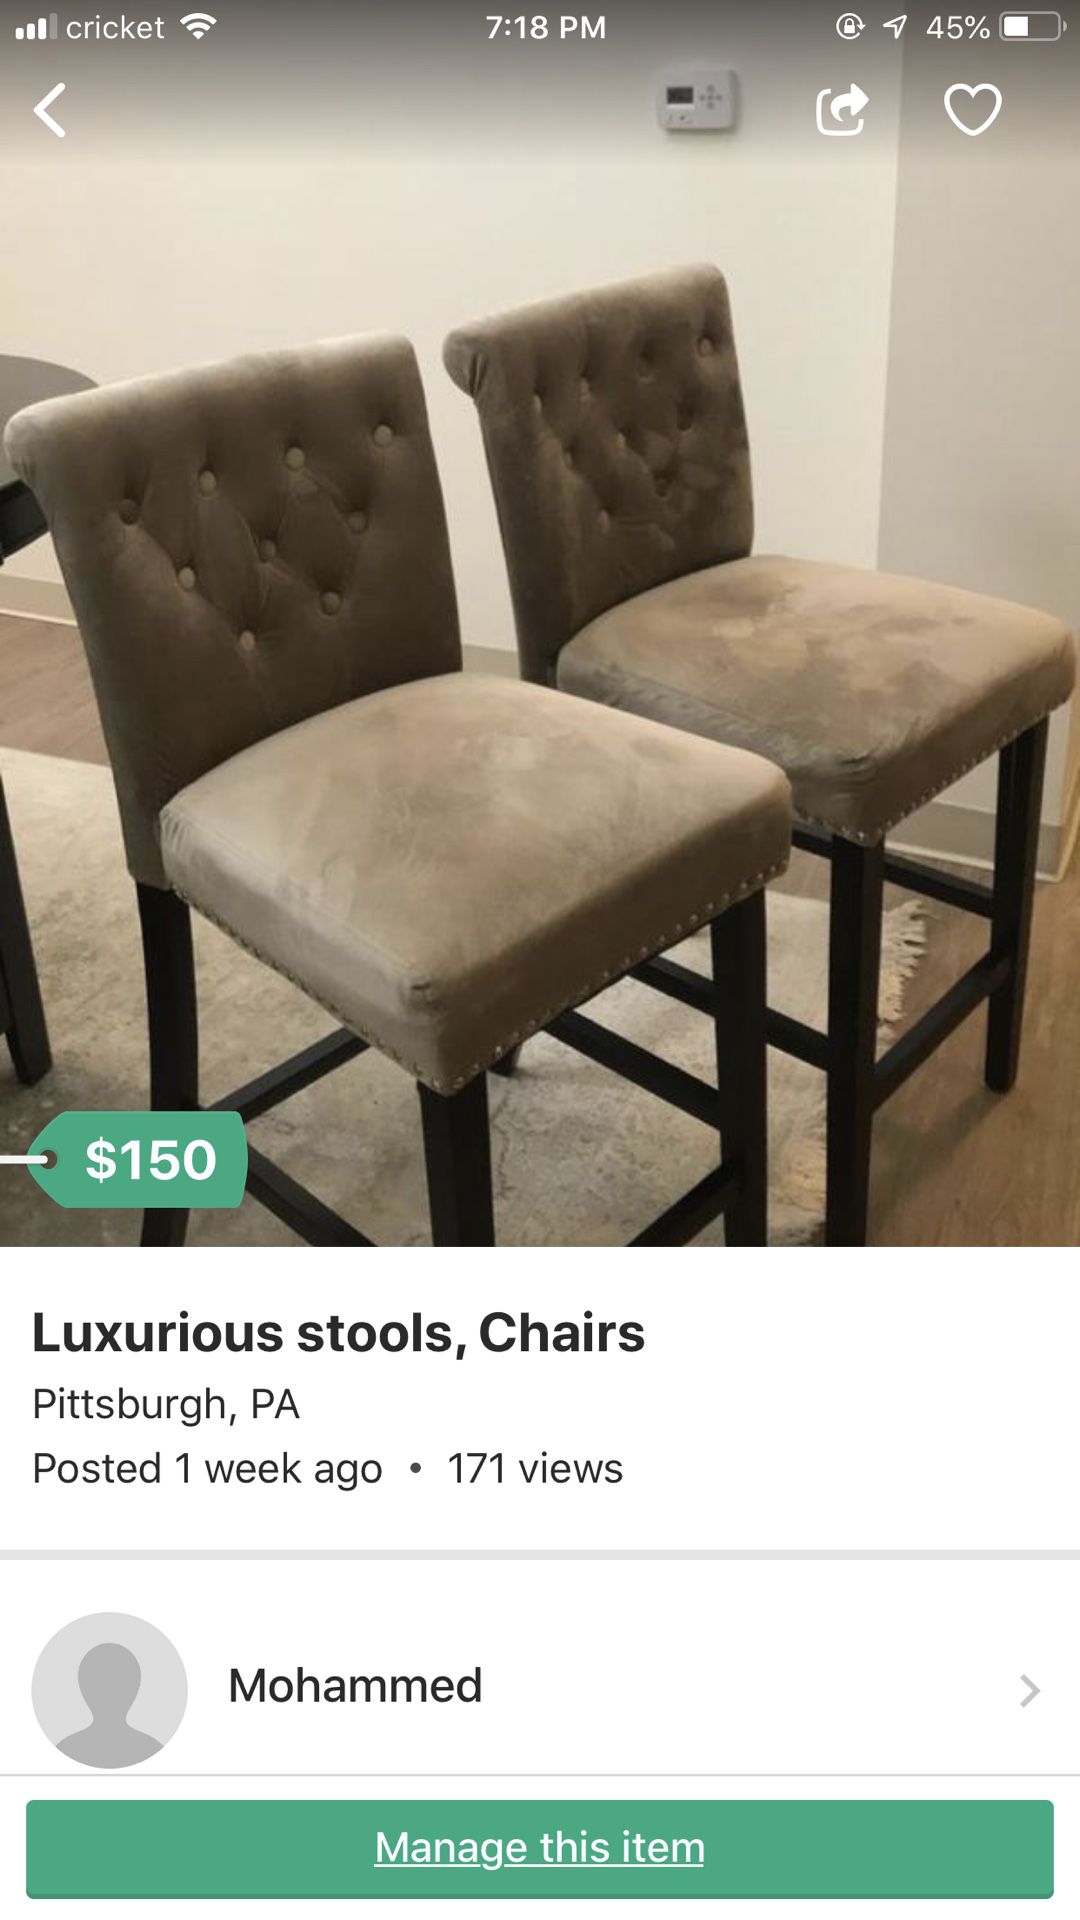 Luxurious stools, Chairs